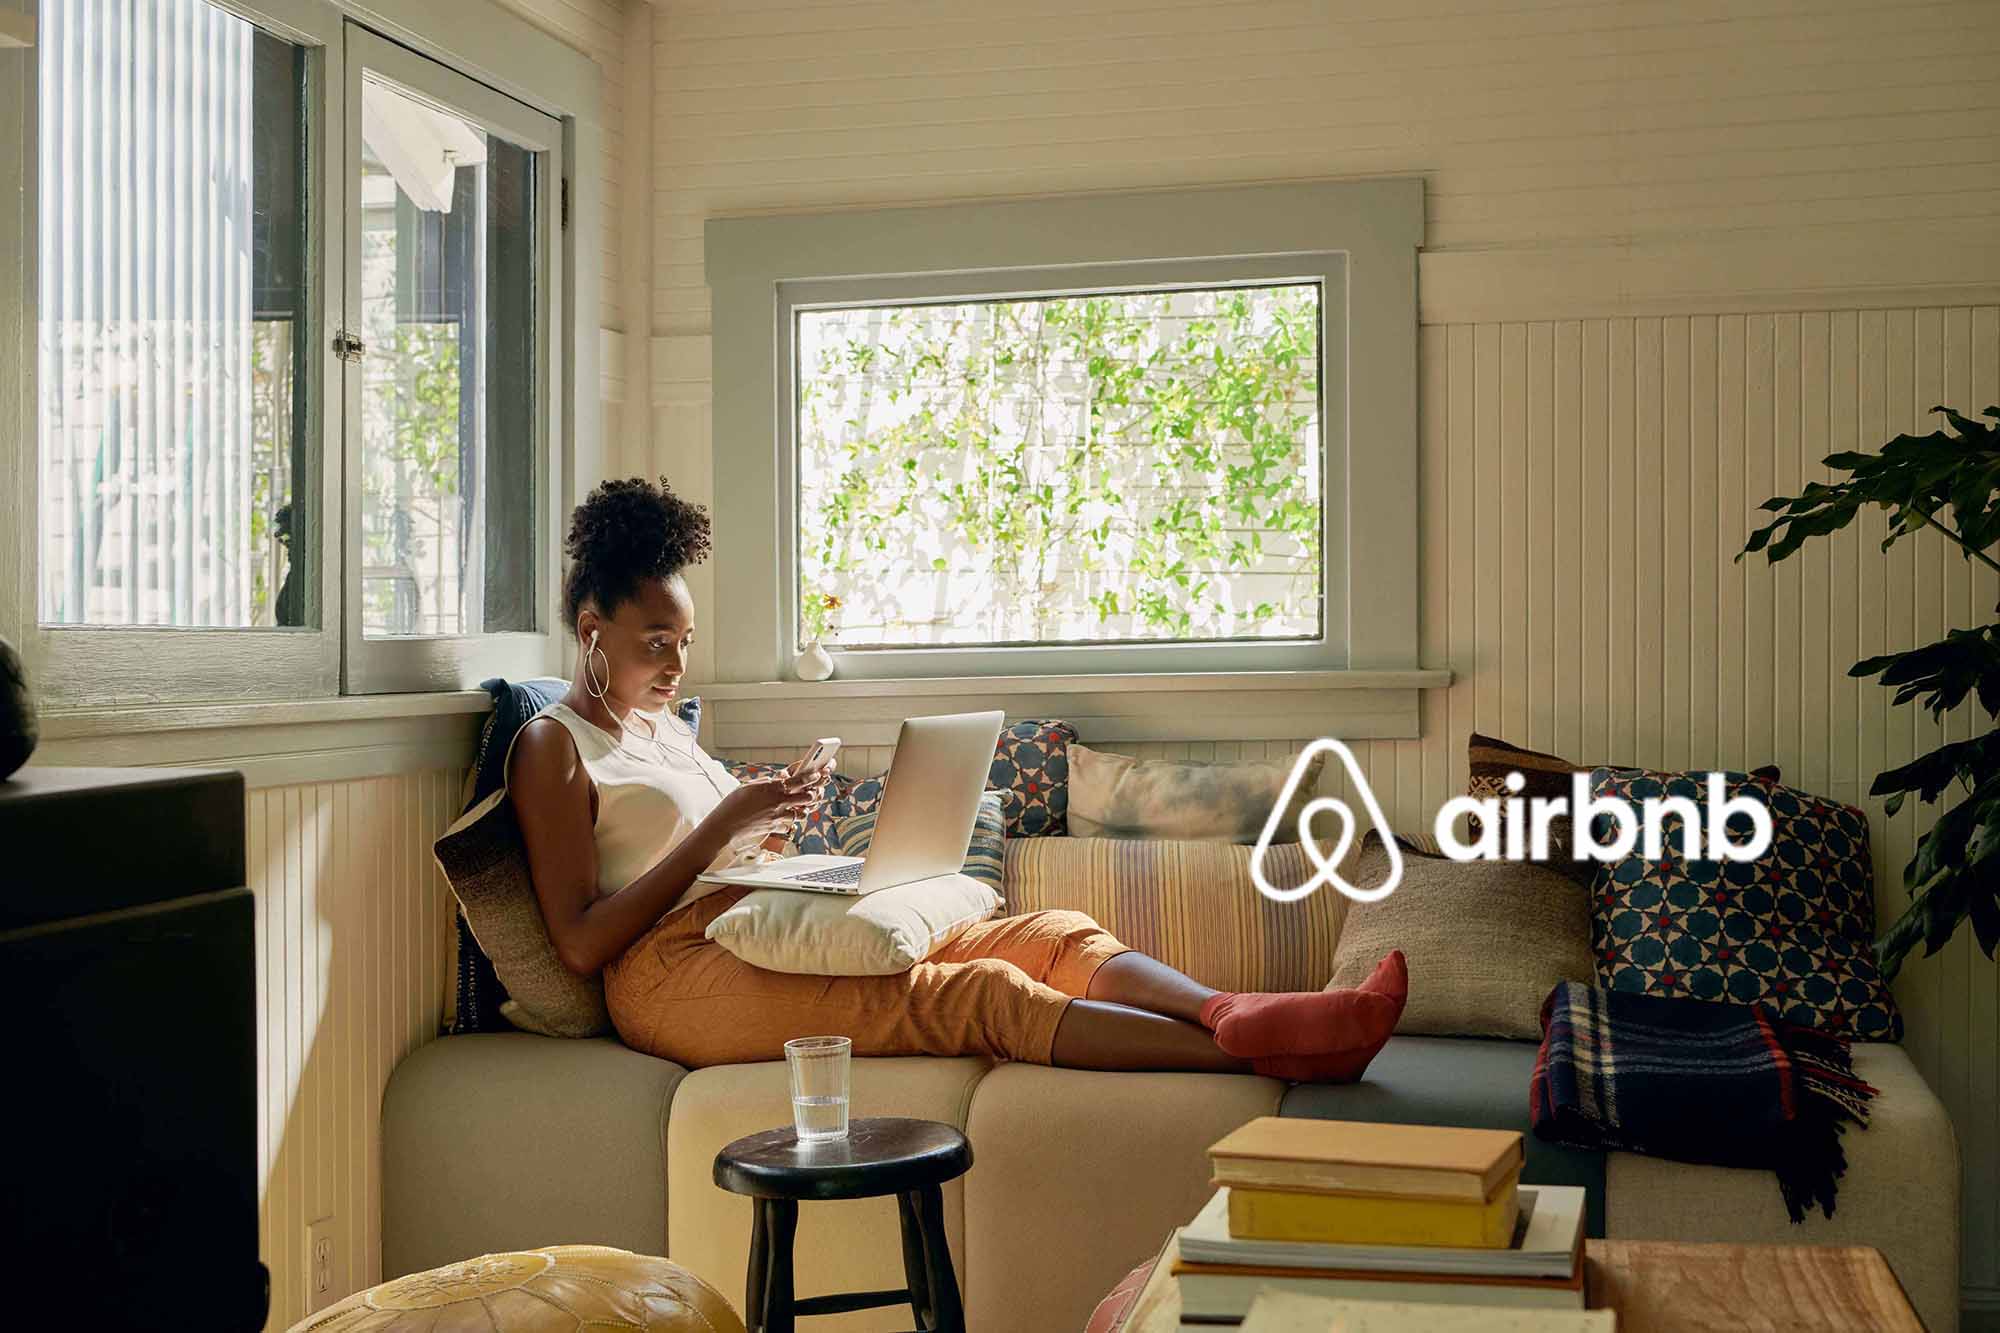 Airbnb unveils new tool enabling guests to check WiFi speed in listings before booking